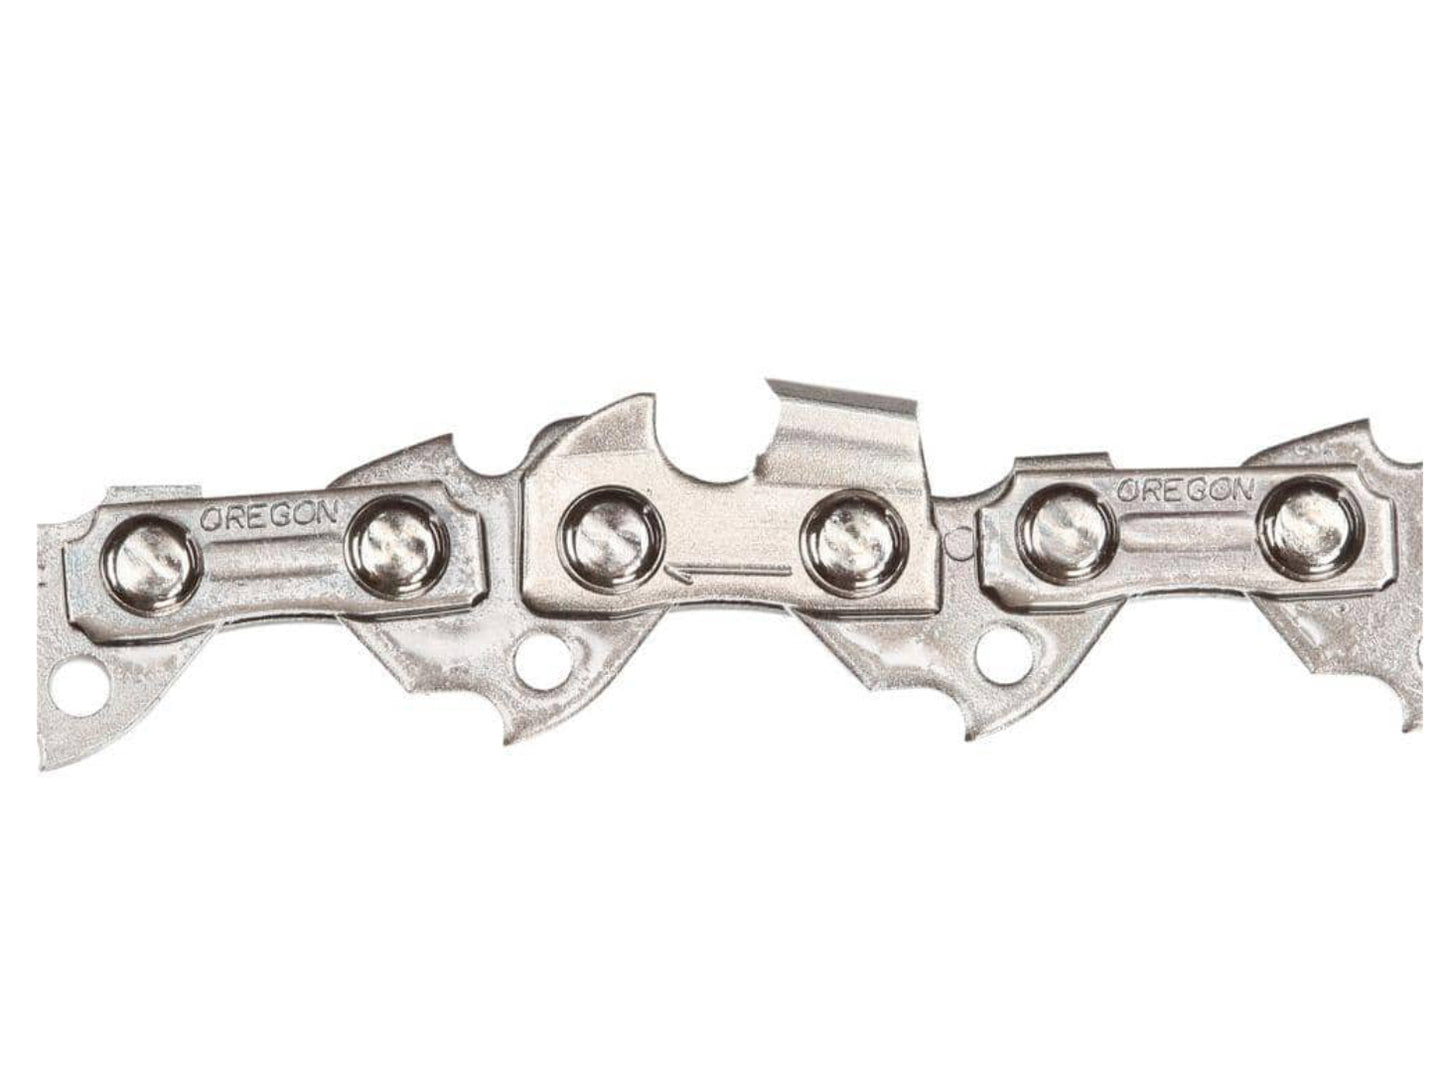 ECHO 18 in. Low Profile Chainsaw Chain - 62 Link